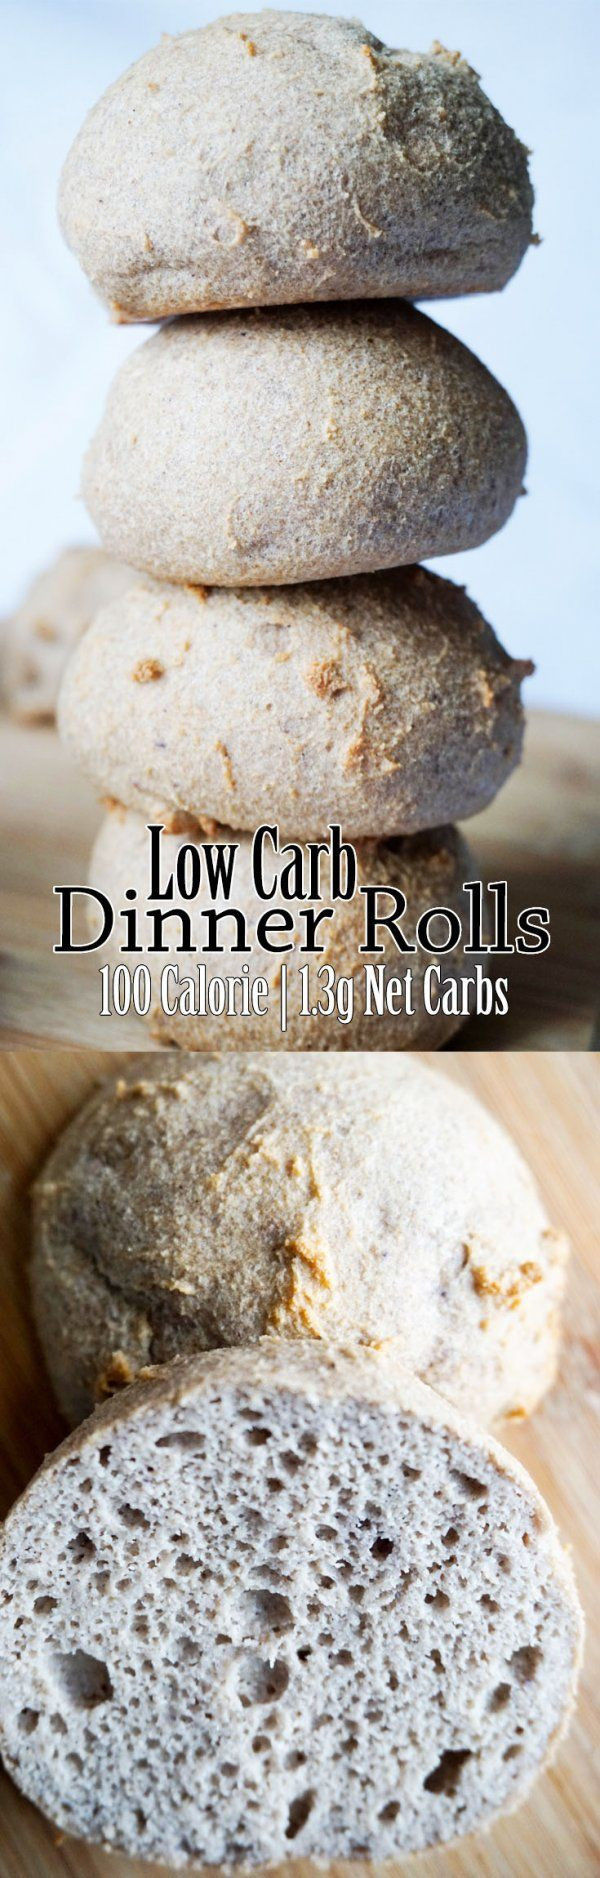 100 Calorie Low Carb Snacks
 The Best Ideas for 100 Calorie Low Carb Snacks Best